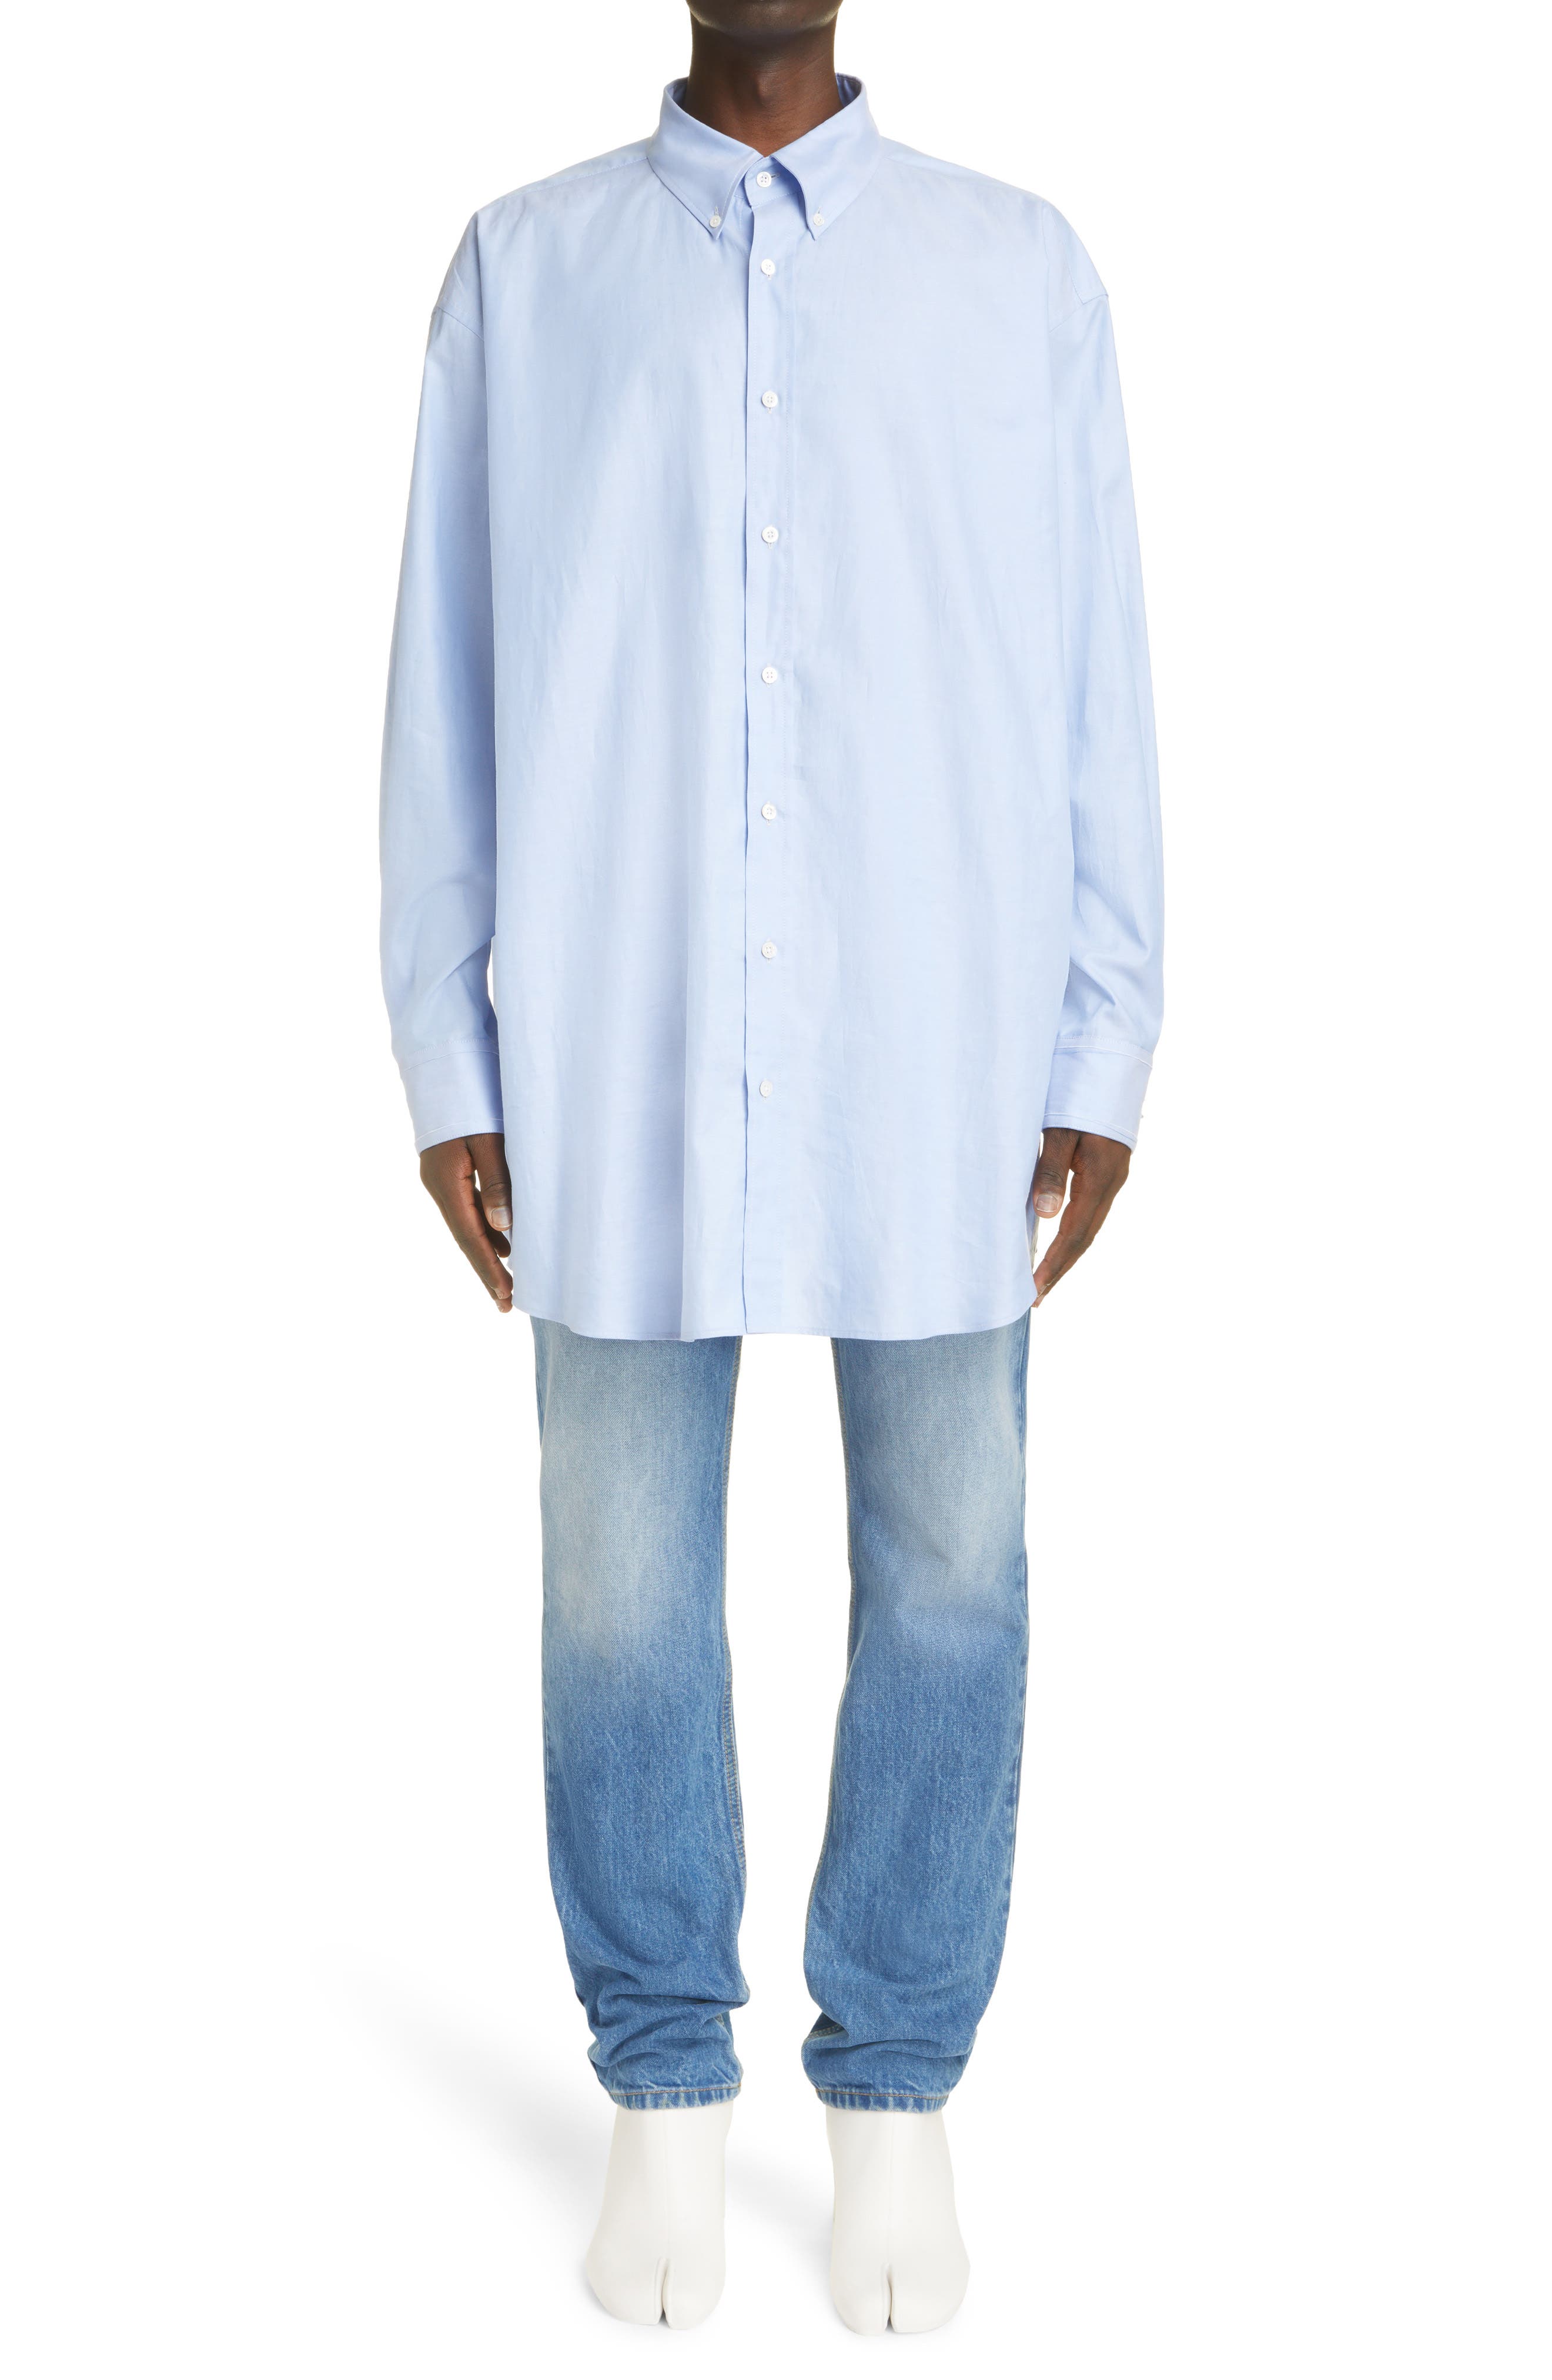 Maison Margiela Cotton Shirts in White for Men Mens Clothing Shirts Casual shirts and button-up shirts 